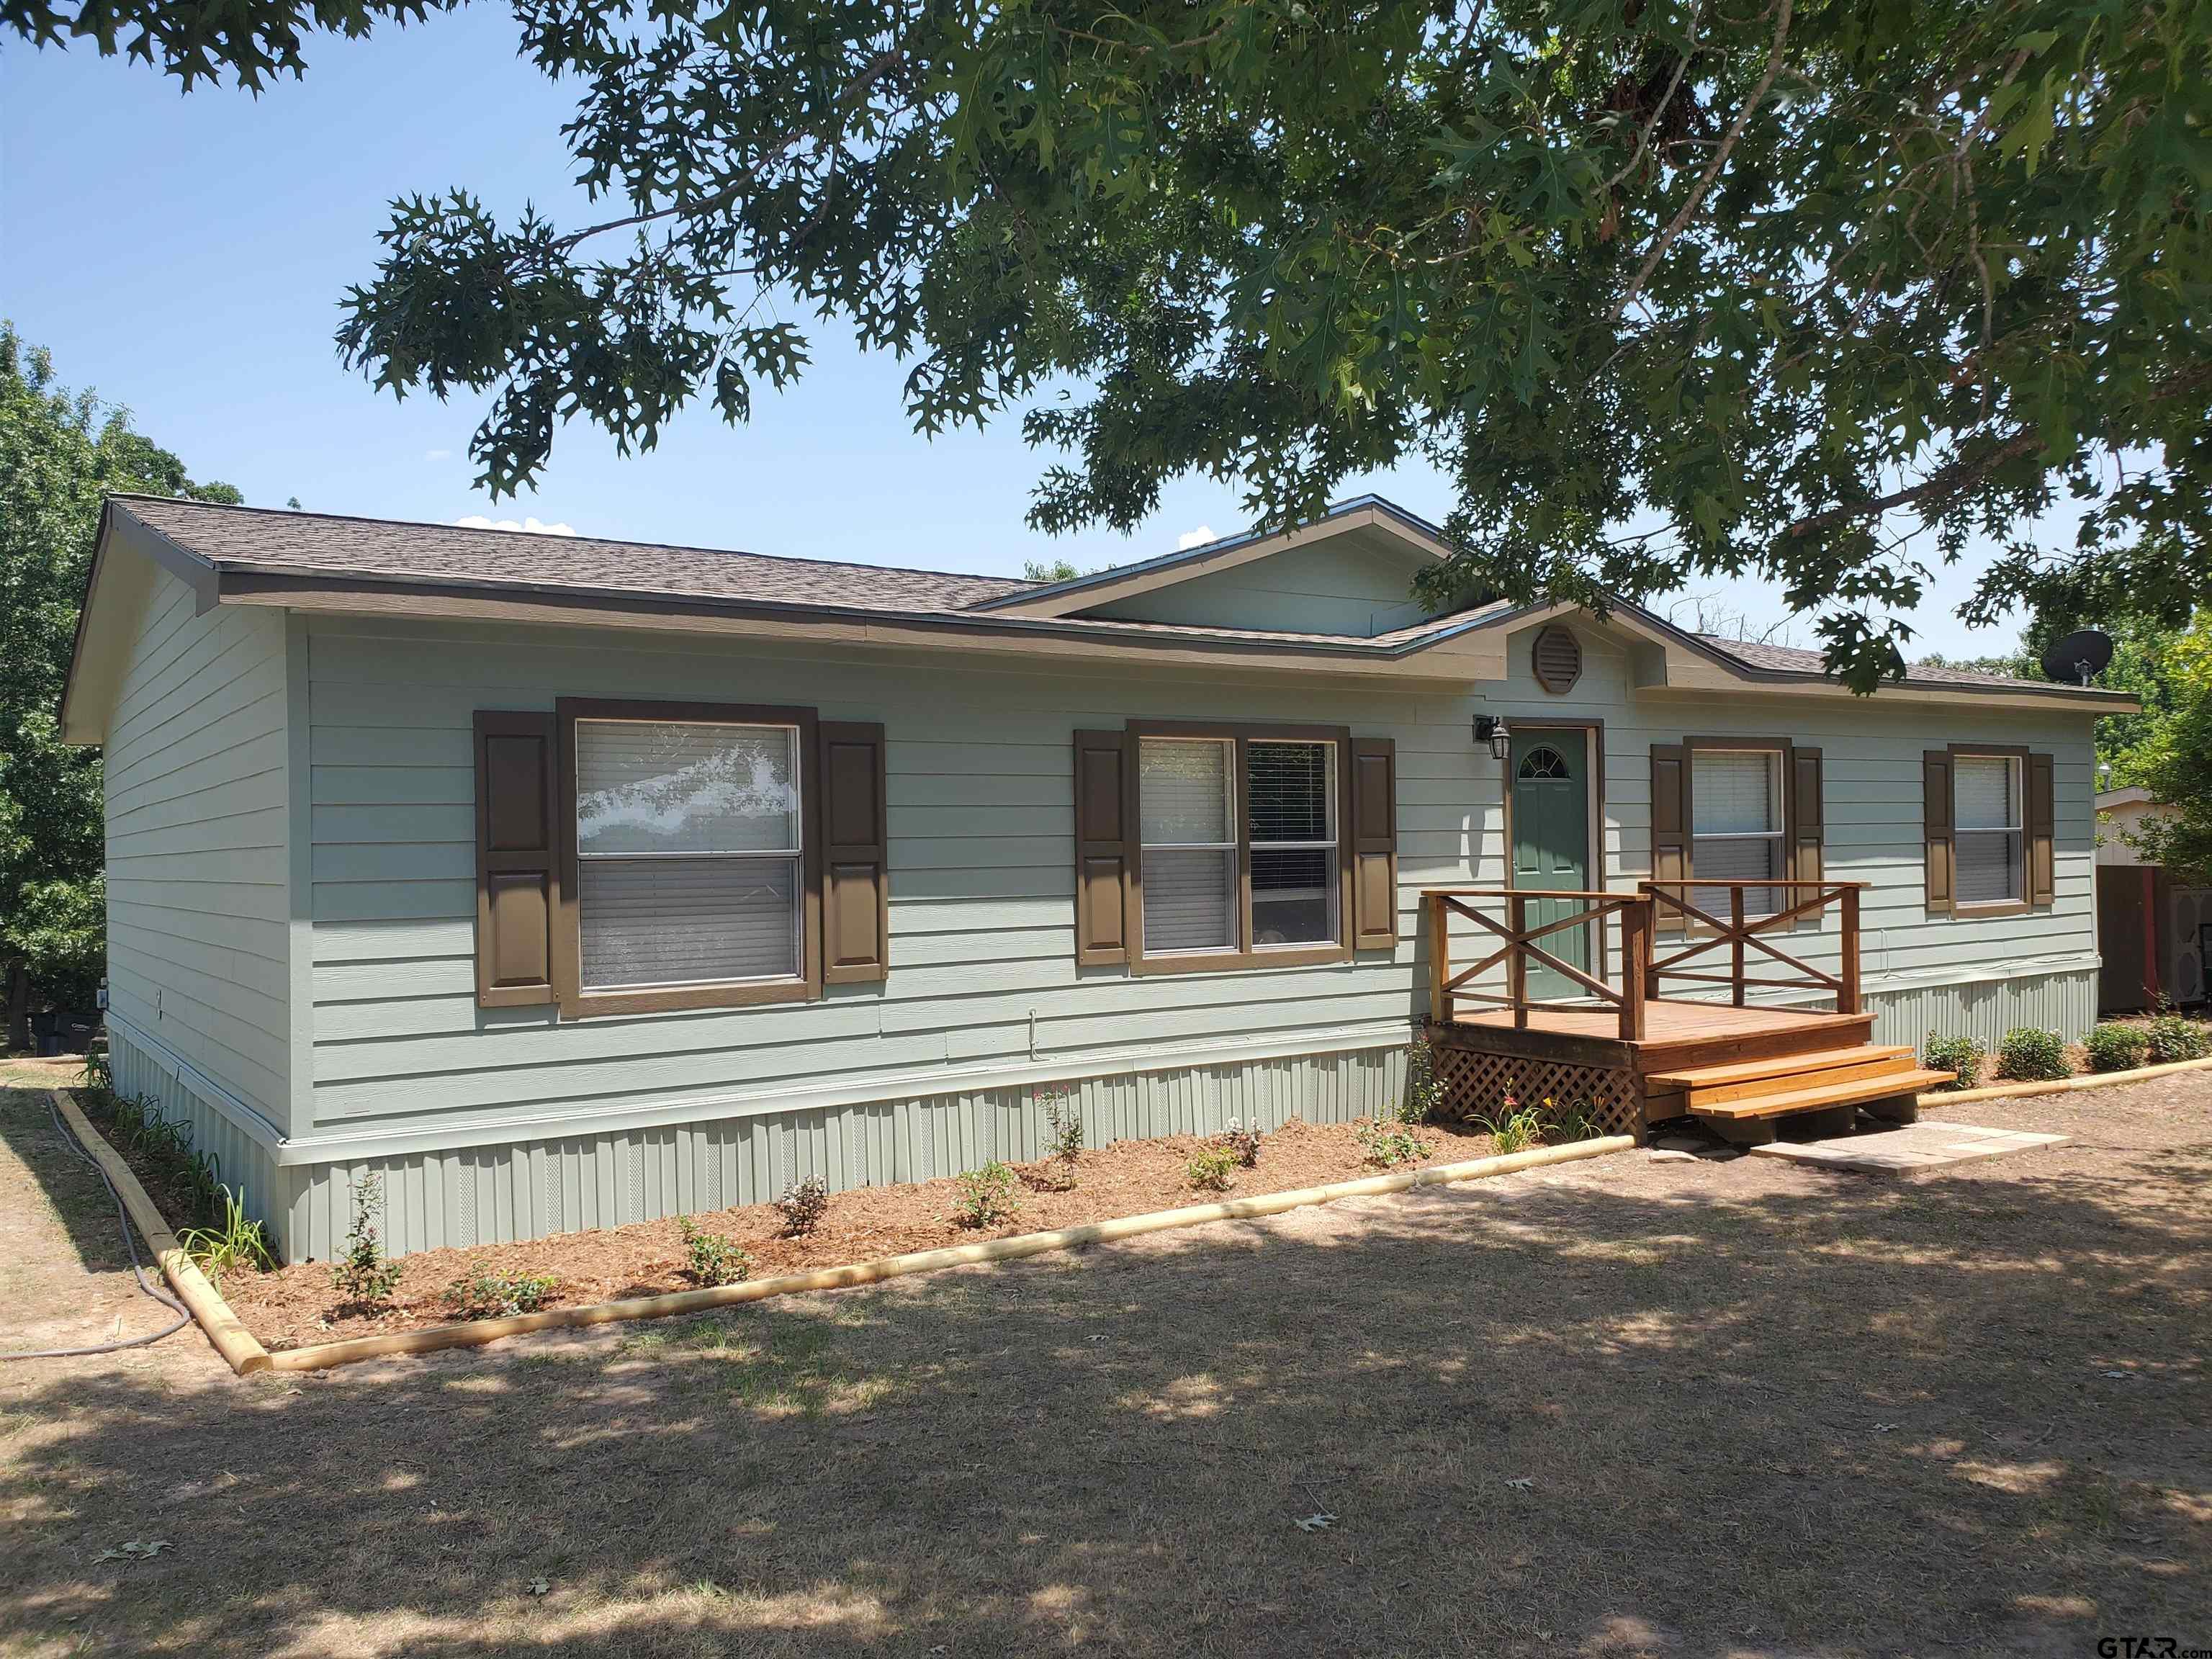 Beautiful 3/2 in Holiday Villages at Lake Fork. Holiday Villages amenities include a clubhouse/restaurant, miniature golf, basketball court, playground area, boat ramps and fishing pier. Community is approximately 10 minutes outside of Quitman and approx. 1.5 to 2 hours from Dallas and approx. 1 hour from Tyler.